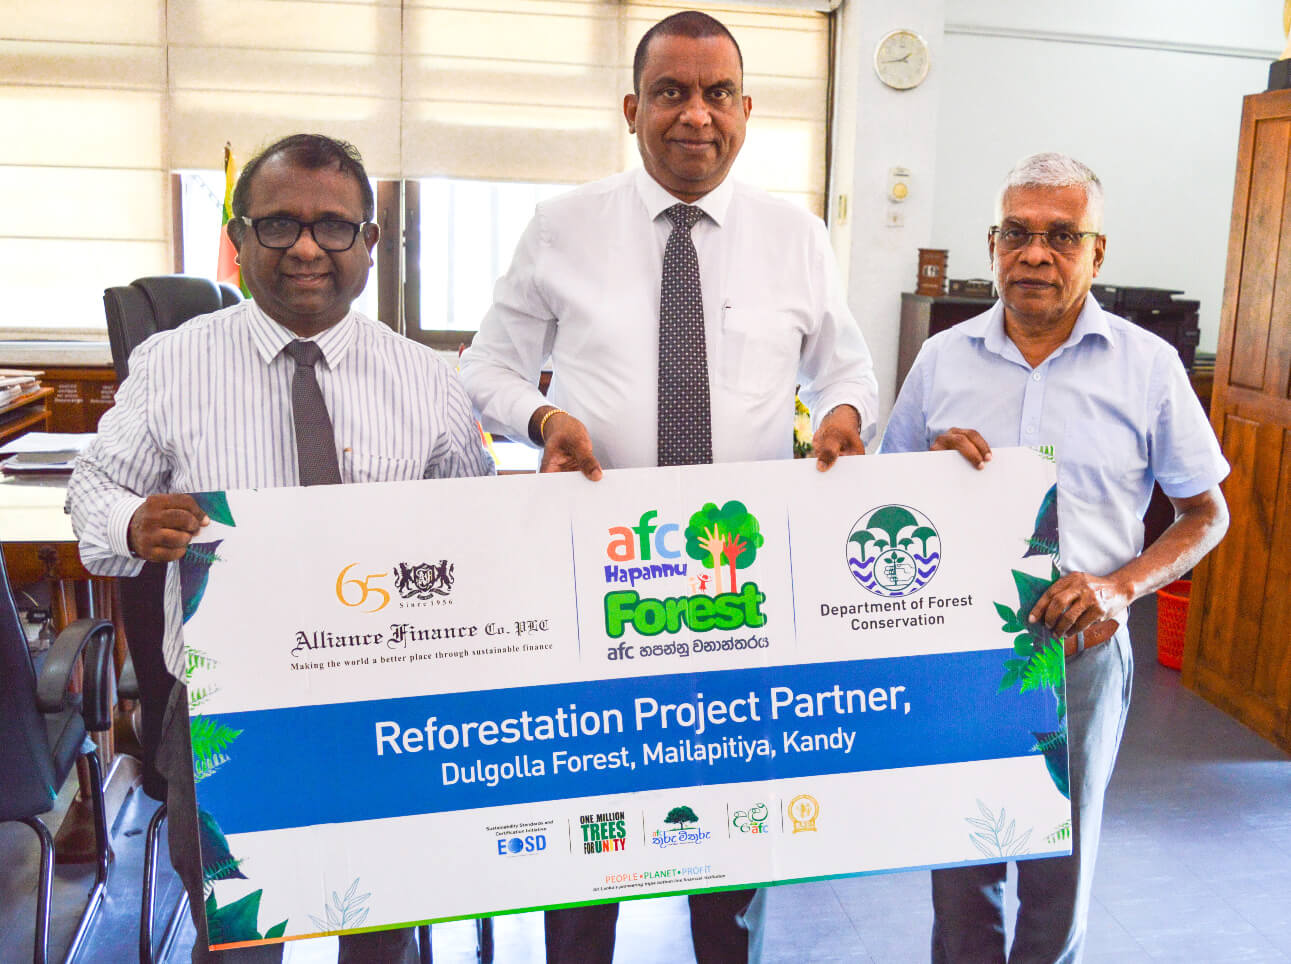 Sri Lanka’s First forest created by children through a public private partnership between the Department of Forest Conservation of Sri Lanka and Alliance Finance Company PLC